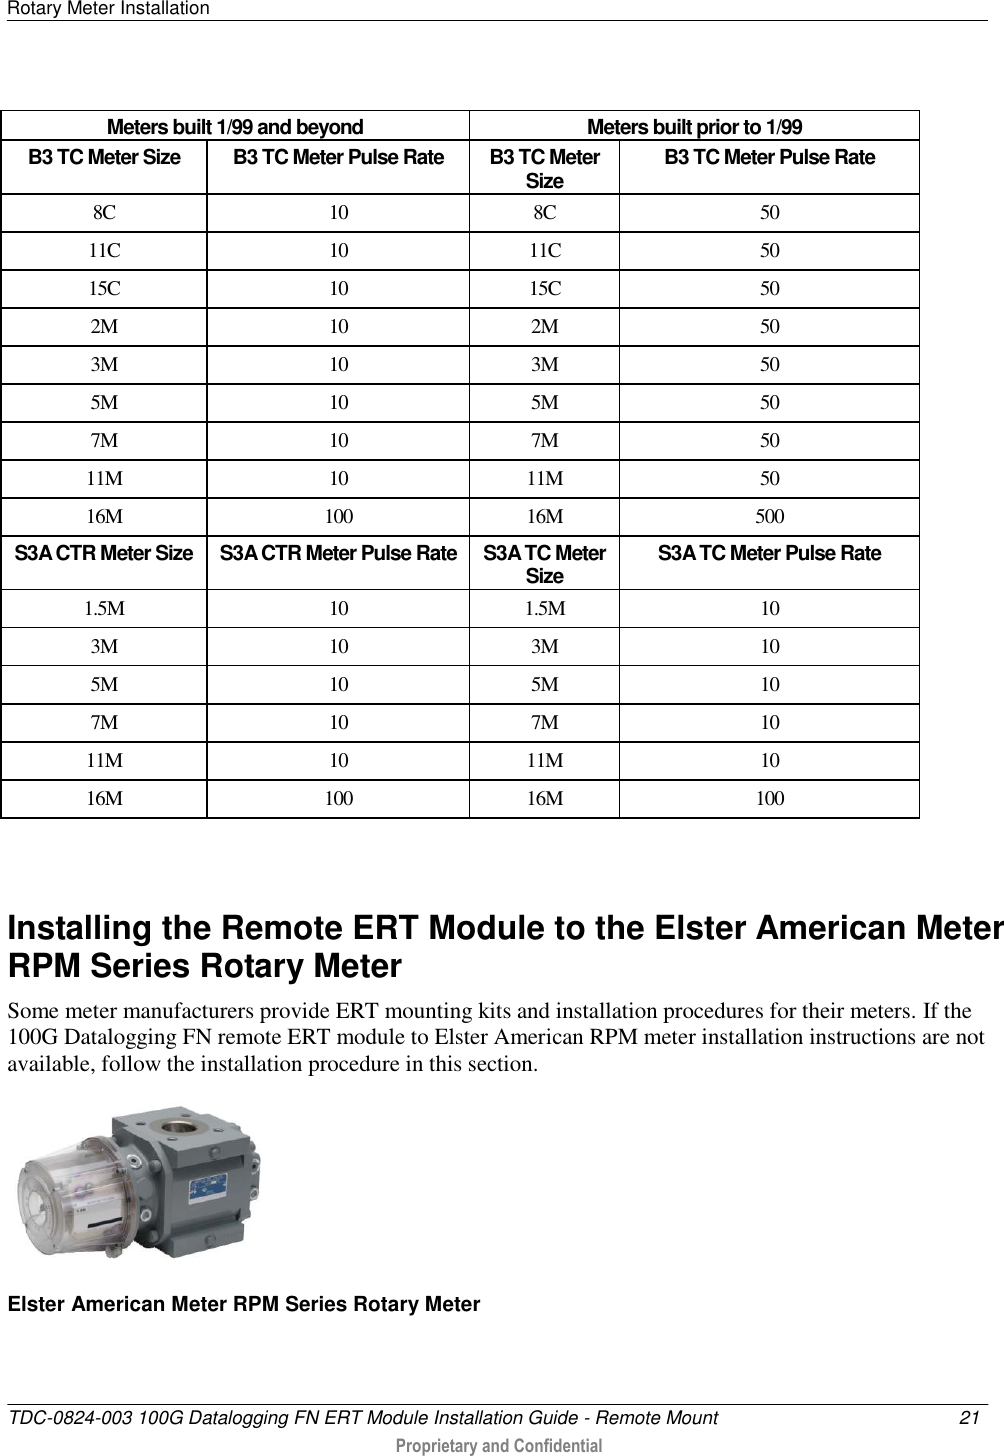 Rotary Meter Installation   TDC-0824-003 100G Datalogging FN ERT Module Installation Guide - Remote Mount  21   Proprietary and Confidential      Meters built 1/99 and beyond Meters built prior to 1/99 B3 TC Meter Size B3 TC Meter Pulse Rate B3 TC Meter Size B3 TC Meter Pulse Rate 8C 10 8C 50 11C 10 11C 50 15C 10 15C 50 2M 10 2M 50 3M 10 3M 50 5M 10 5M 50 7M 10 7M 50 11M 10 11M 50 16M 100 16M 500 S3A CTR Meter Size S3A CTR Meter Pulse Rate S3A TC Meter Size S3A TC Meter Pulse Rate 1.5M 10 1.5M 10 3M 10 3M 10 5M 10 5M 10 7M 10 7M 10 11M 10 11M 10 16M 100 16M 100  Installing the Remote ERT Module to the Elster American Meter RPM Series Rotary Meter Some meter manufacturers provide ERT mounting kits and installation procedures for their meters. If the 100G Datalogging FN remote ERT module to Elster American RPM meter installation instructions are not available, follow the installation procedure in this section.  Elster American Meter RPM Series Rotary Meter   